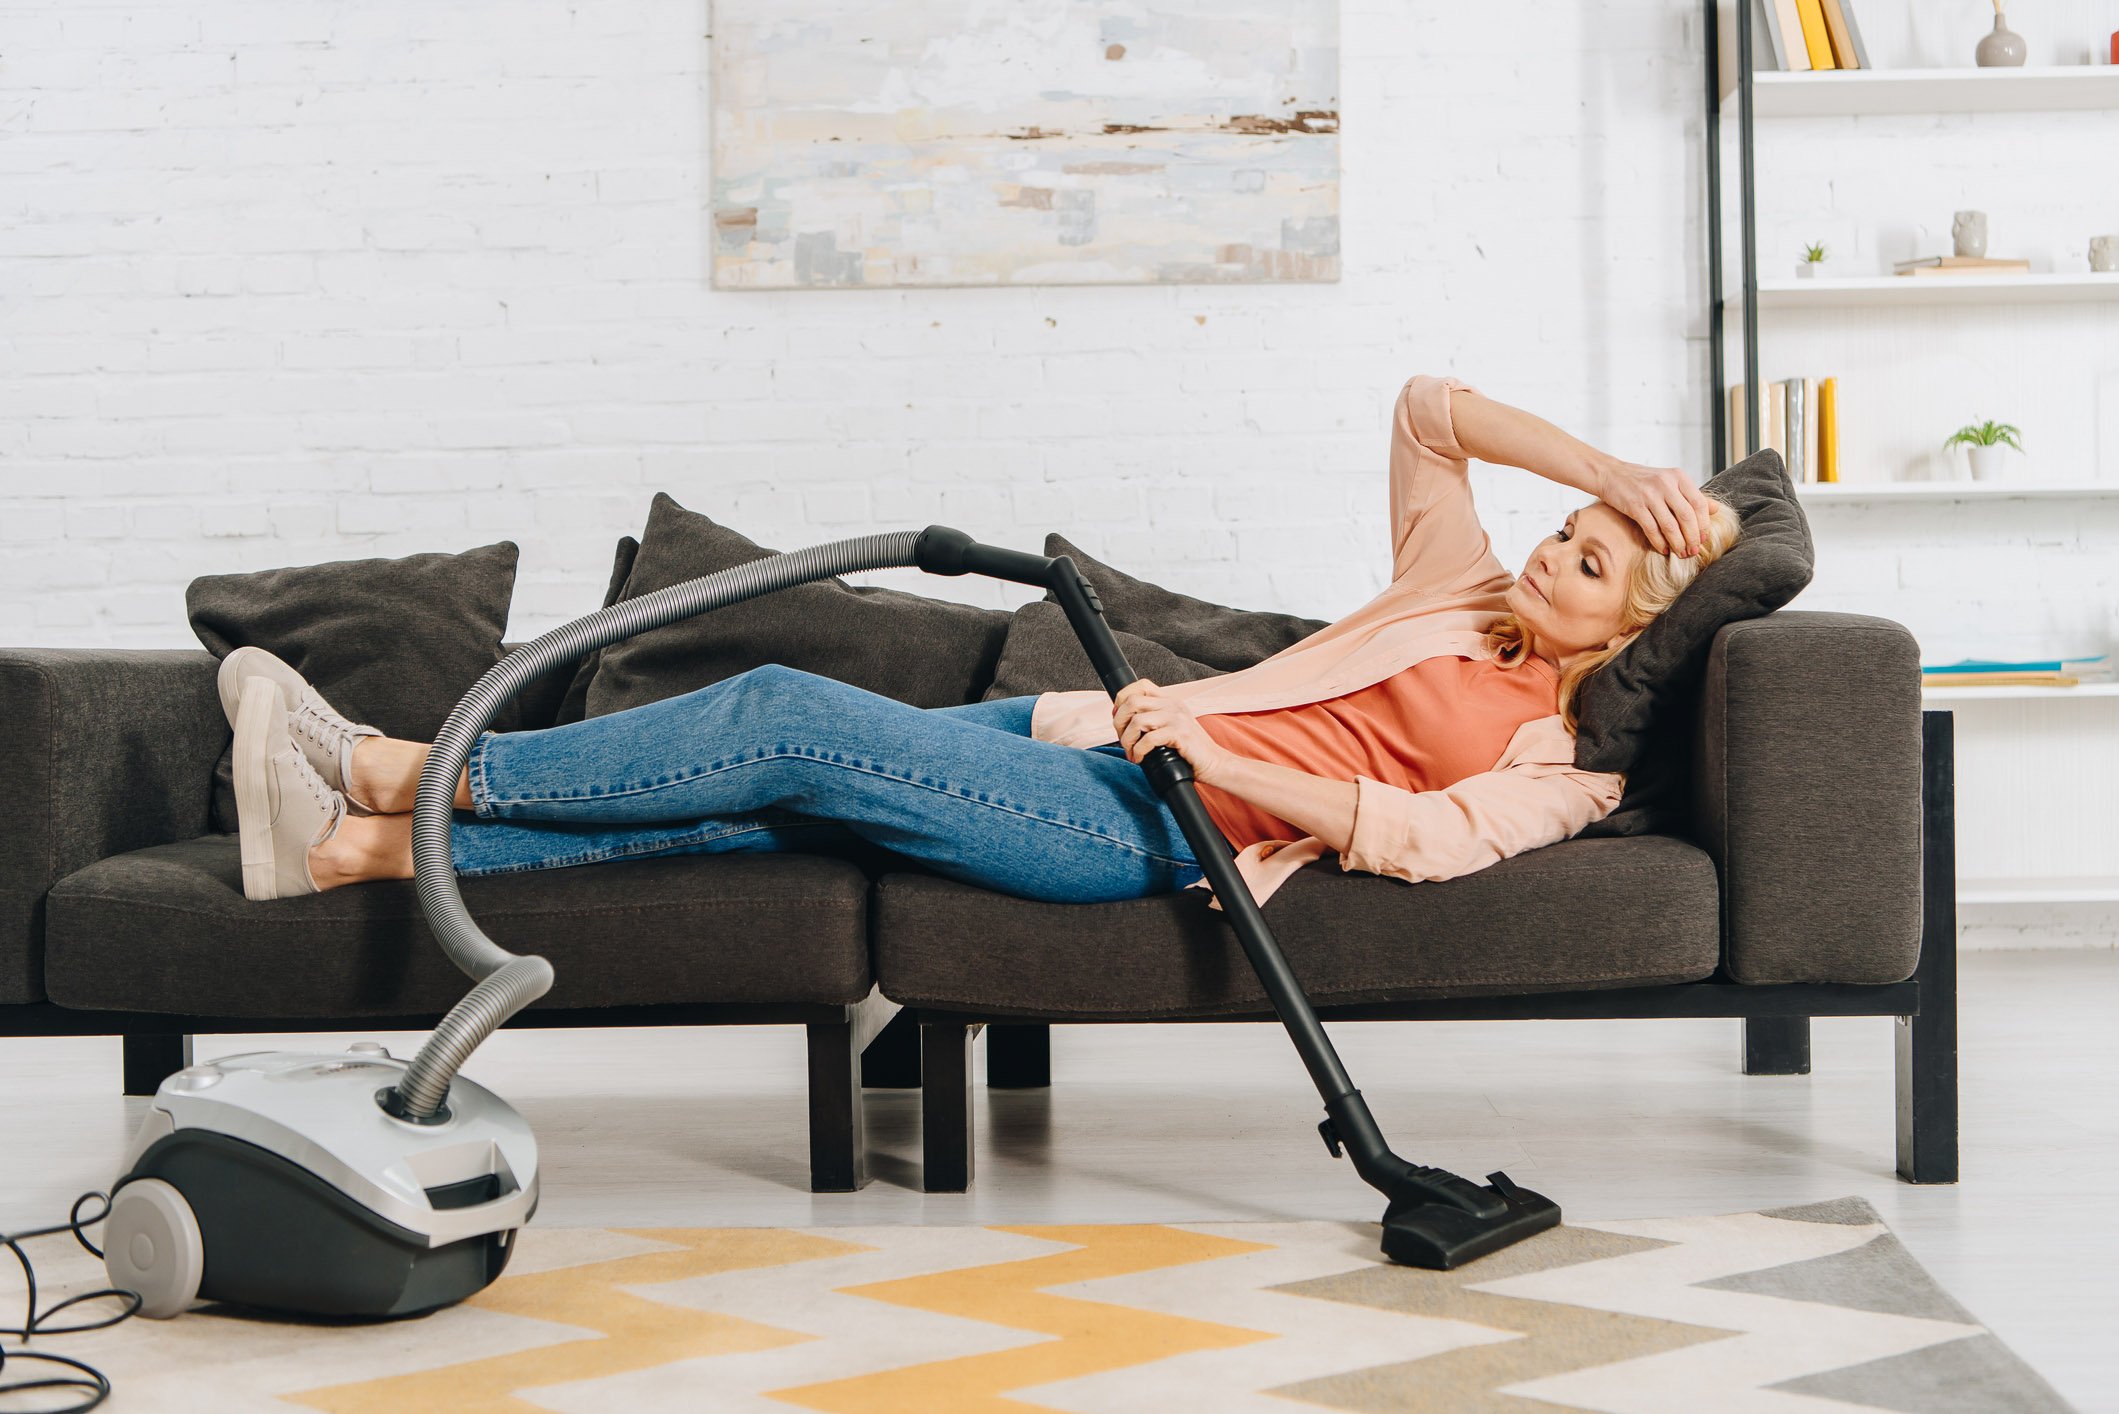 Senior homeowner laying down on a couch holding the vacuum after cleaning the house and becoming exhausted